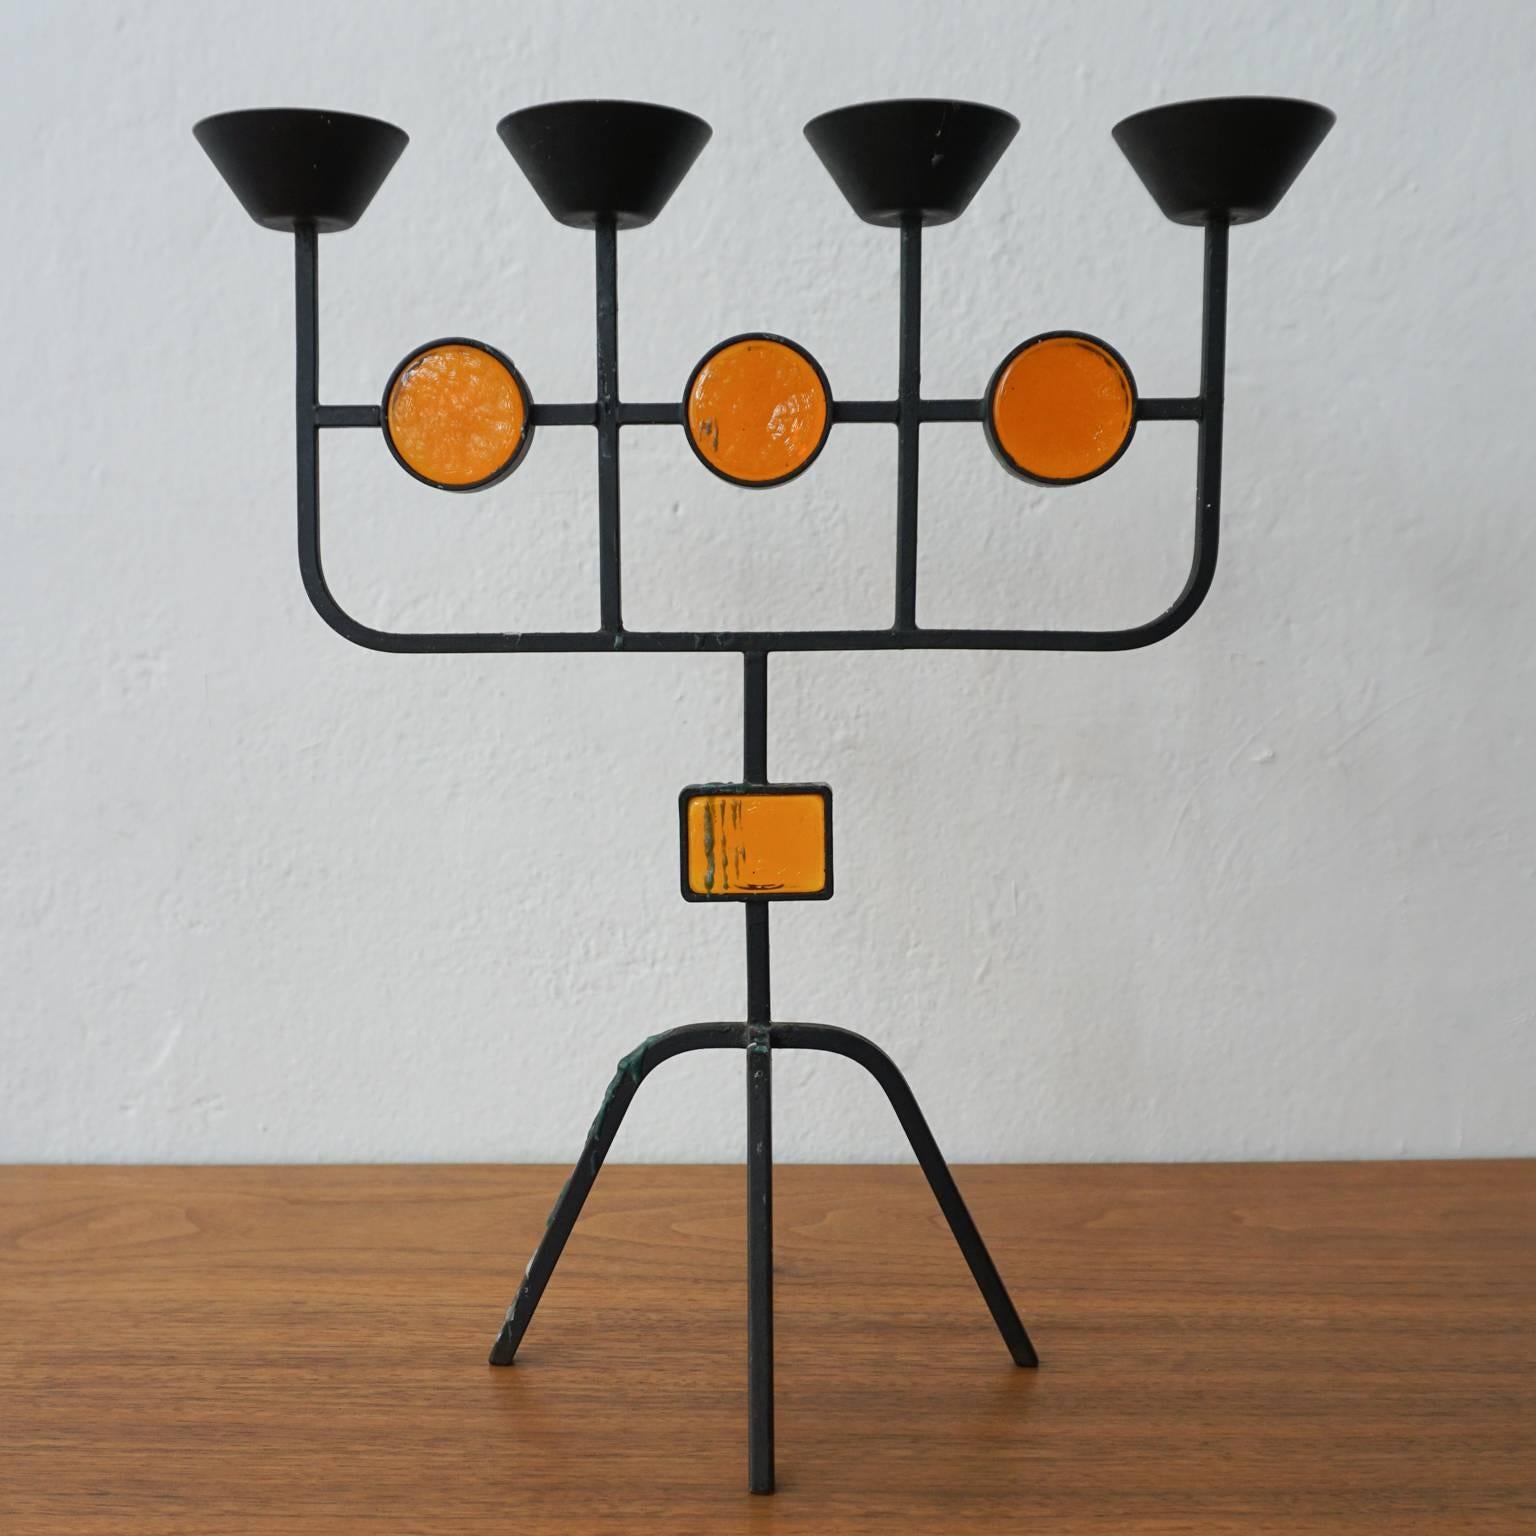 Iron and glass candleholder from Sweden.